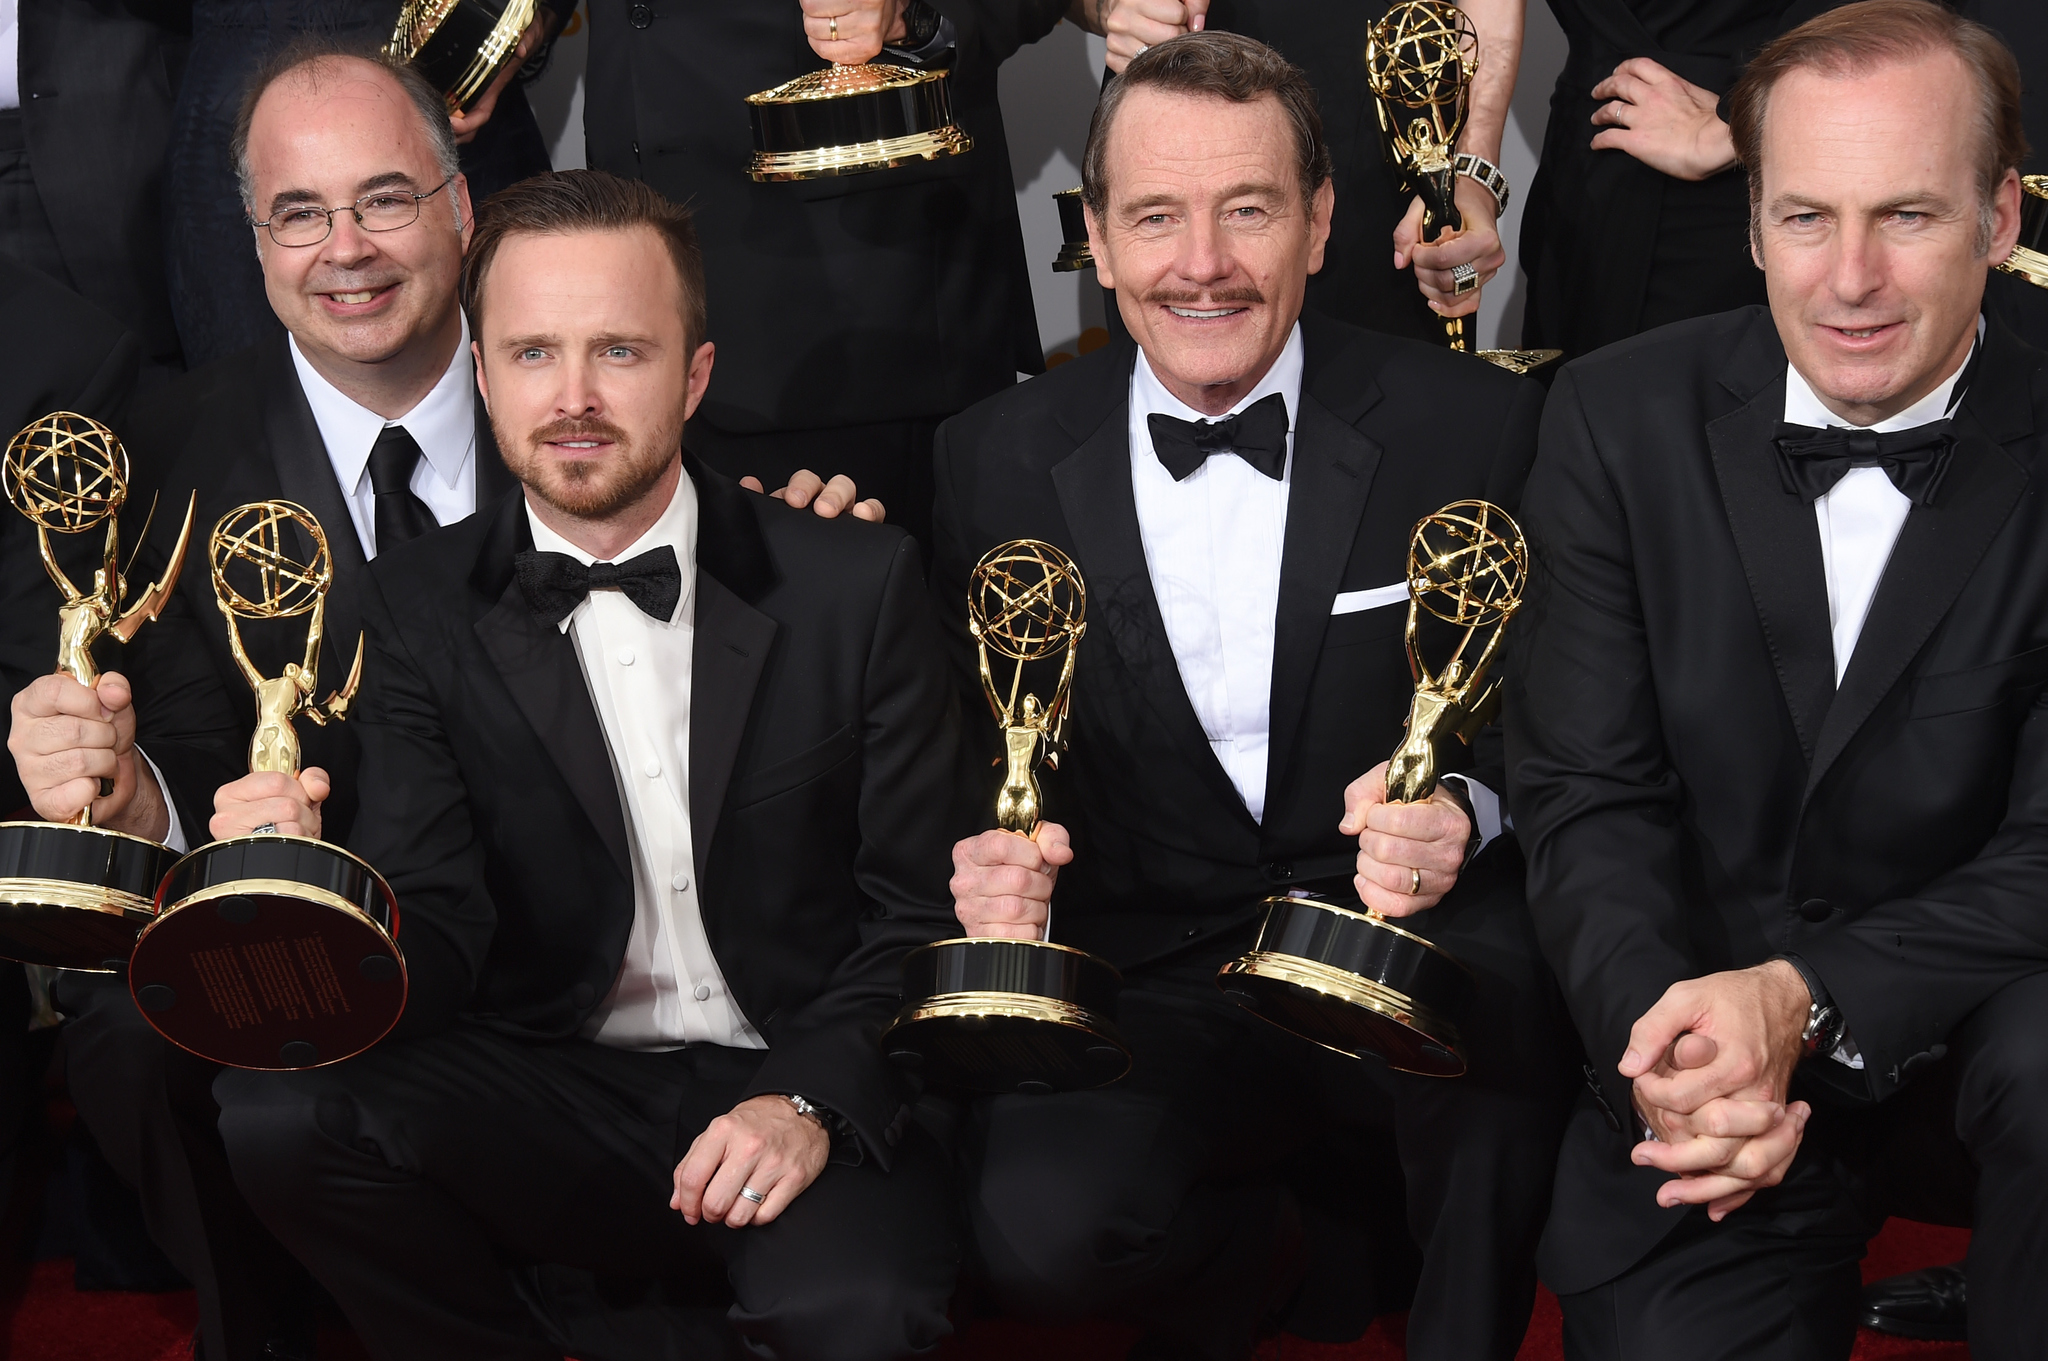 Bryan Cranston, Bob Odenkirk, Aaron Paul and Thomas Schnauz at event of The 66th Primetime Emmy Awards (2014)